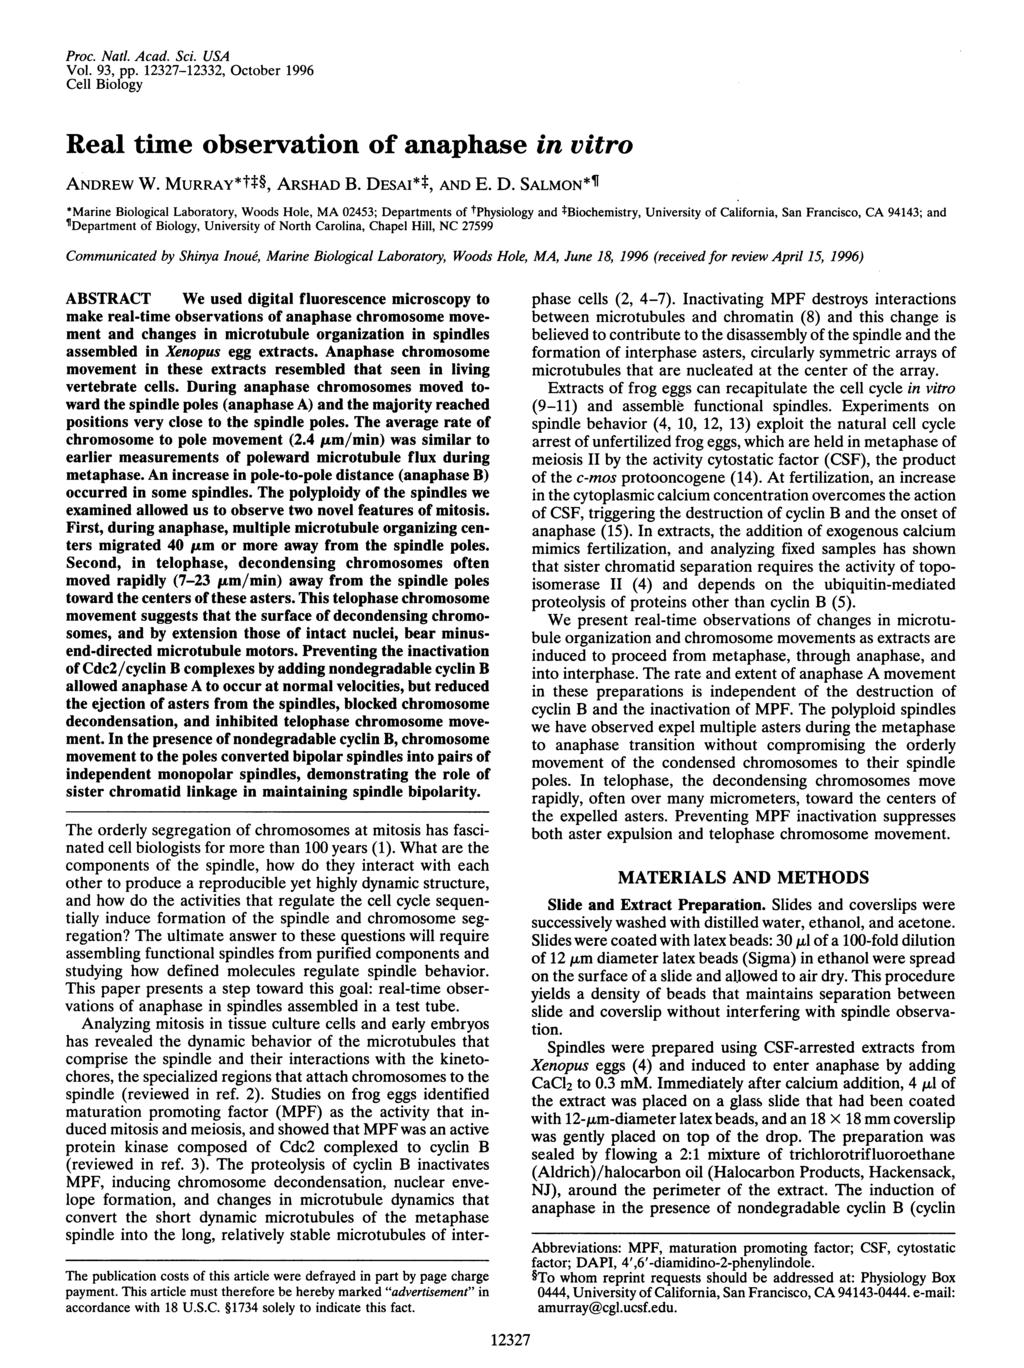 Proc. Natl. Acad. Sci. USA Vol. 93, pp. 12327-12332, October 1996 Cell Biology Real time observation of anaphase in vitro ANDREW W. MURRAY*t#, ARSHAD B. DE